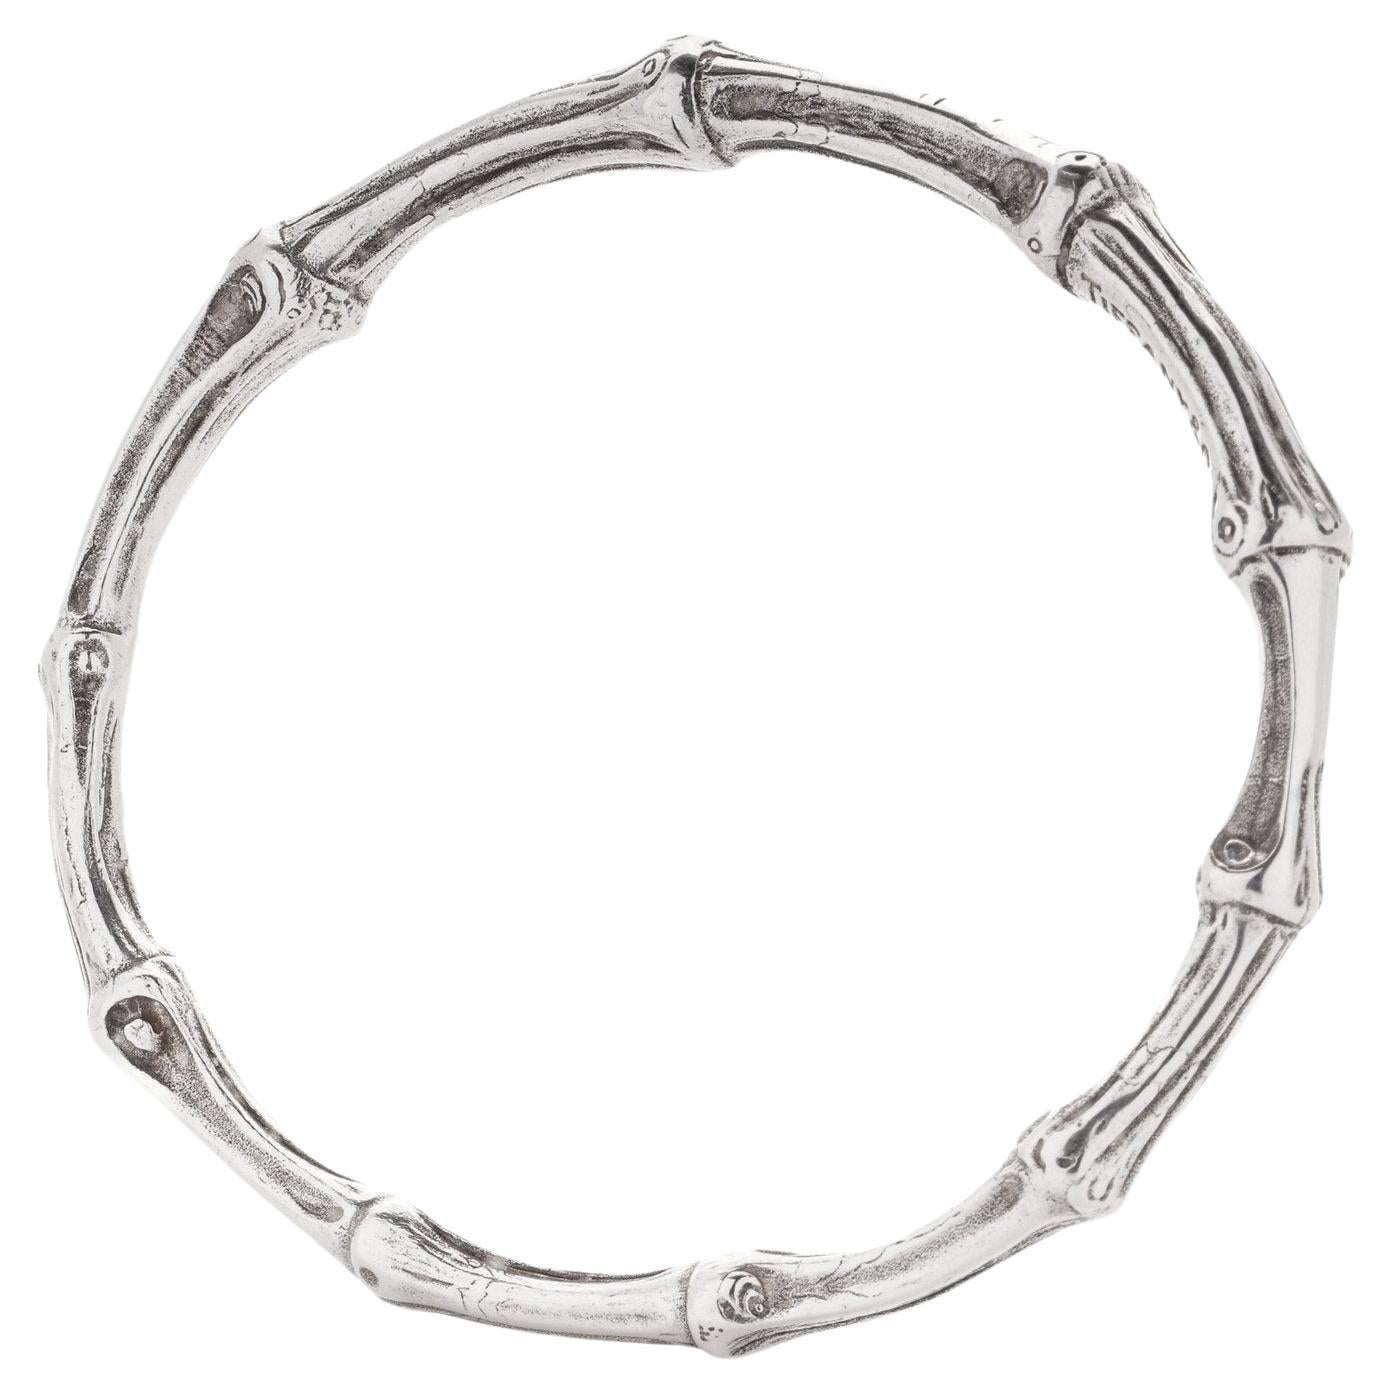 Tiffany & Co. sterling silver bangle in the shape of bamboo